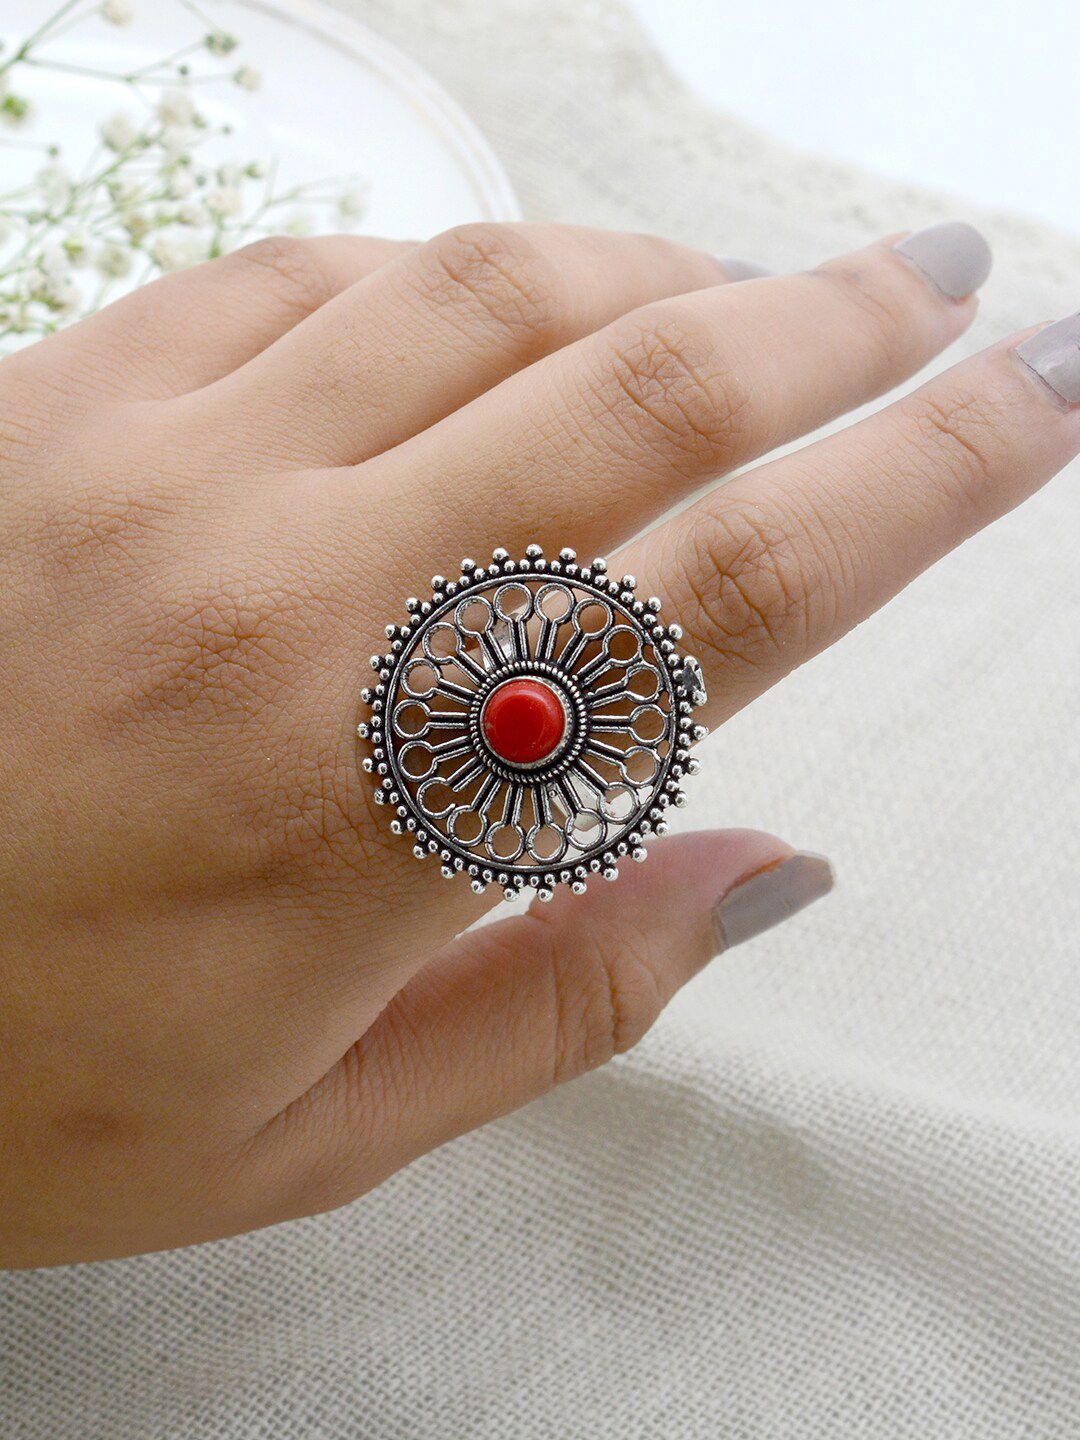 TEEJH Oxidised Silver-Toned & Red Beaded Filigree Finger Ring Price in India